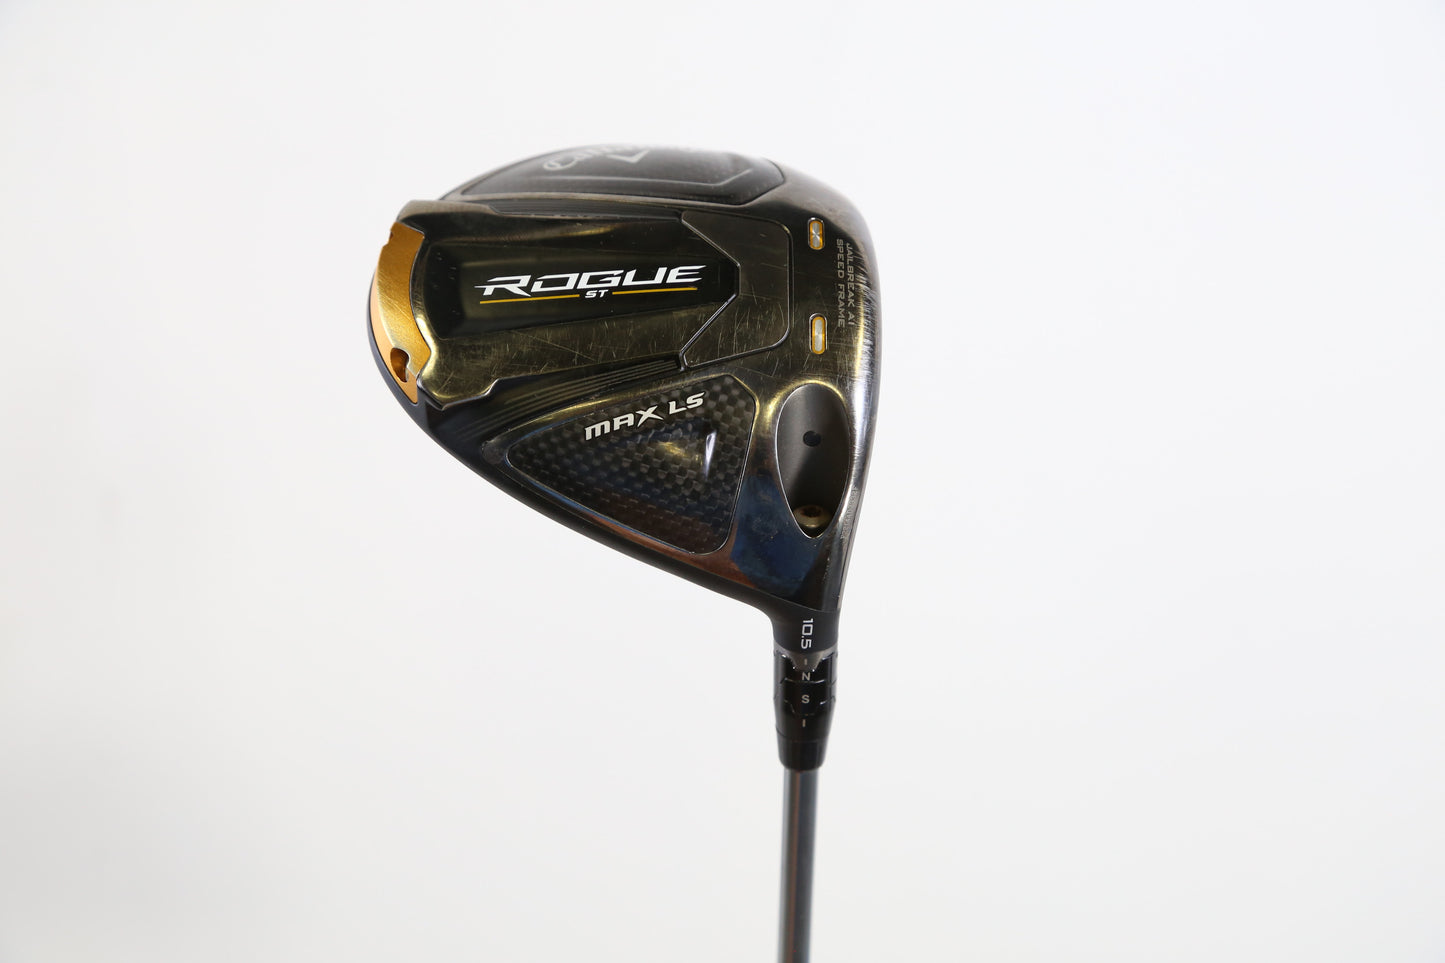 Used Callaway Rogue ST MAX LS Driver - Right-Handed - 10.5 Degrees - Regular Plus Flex